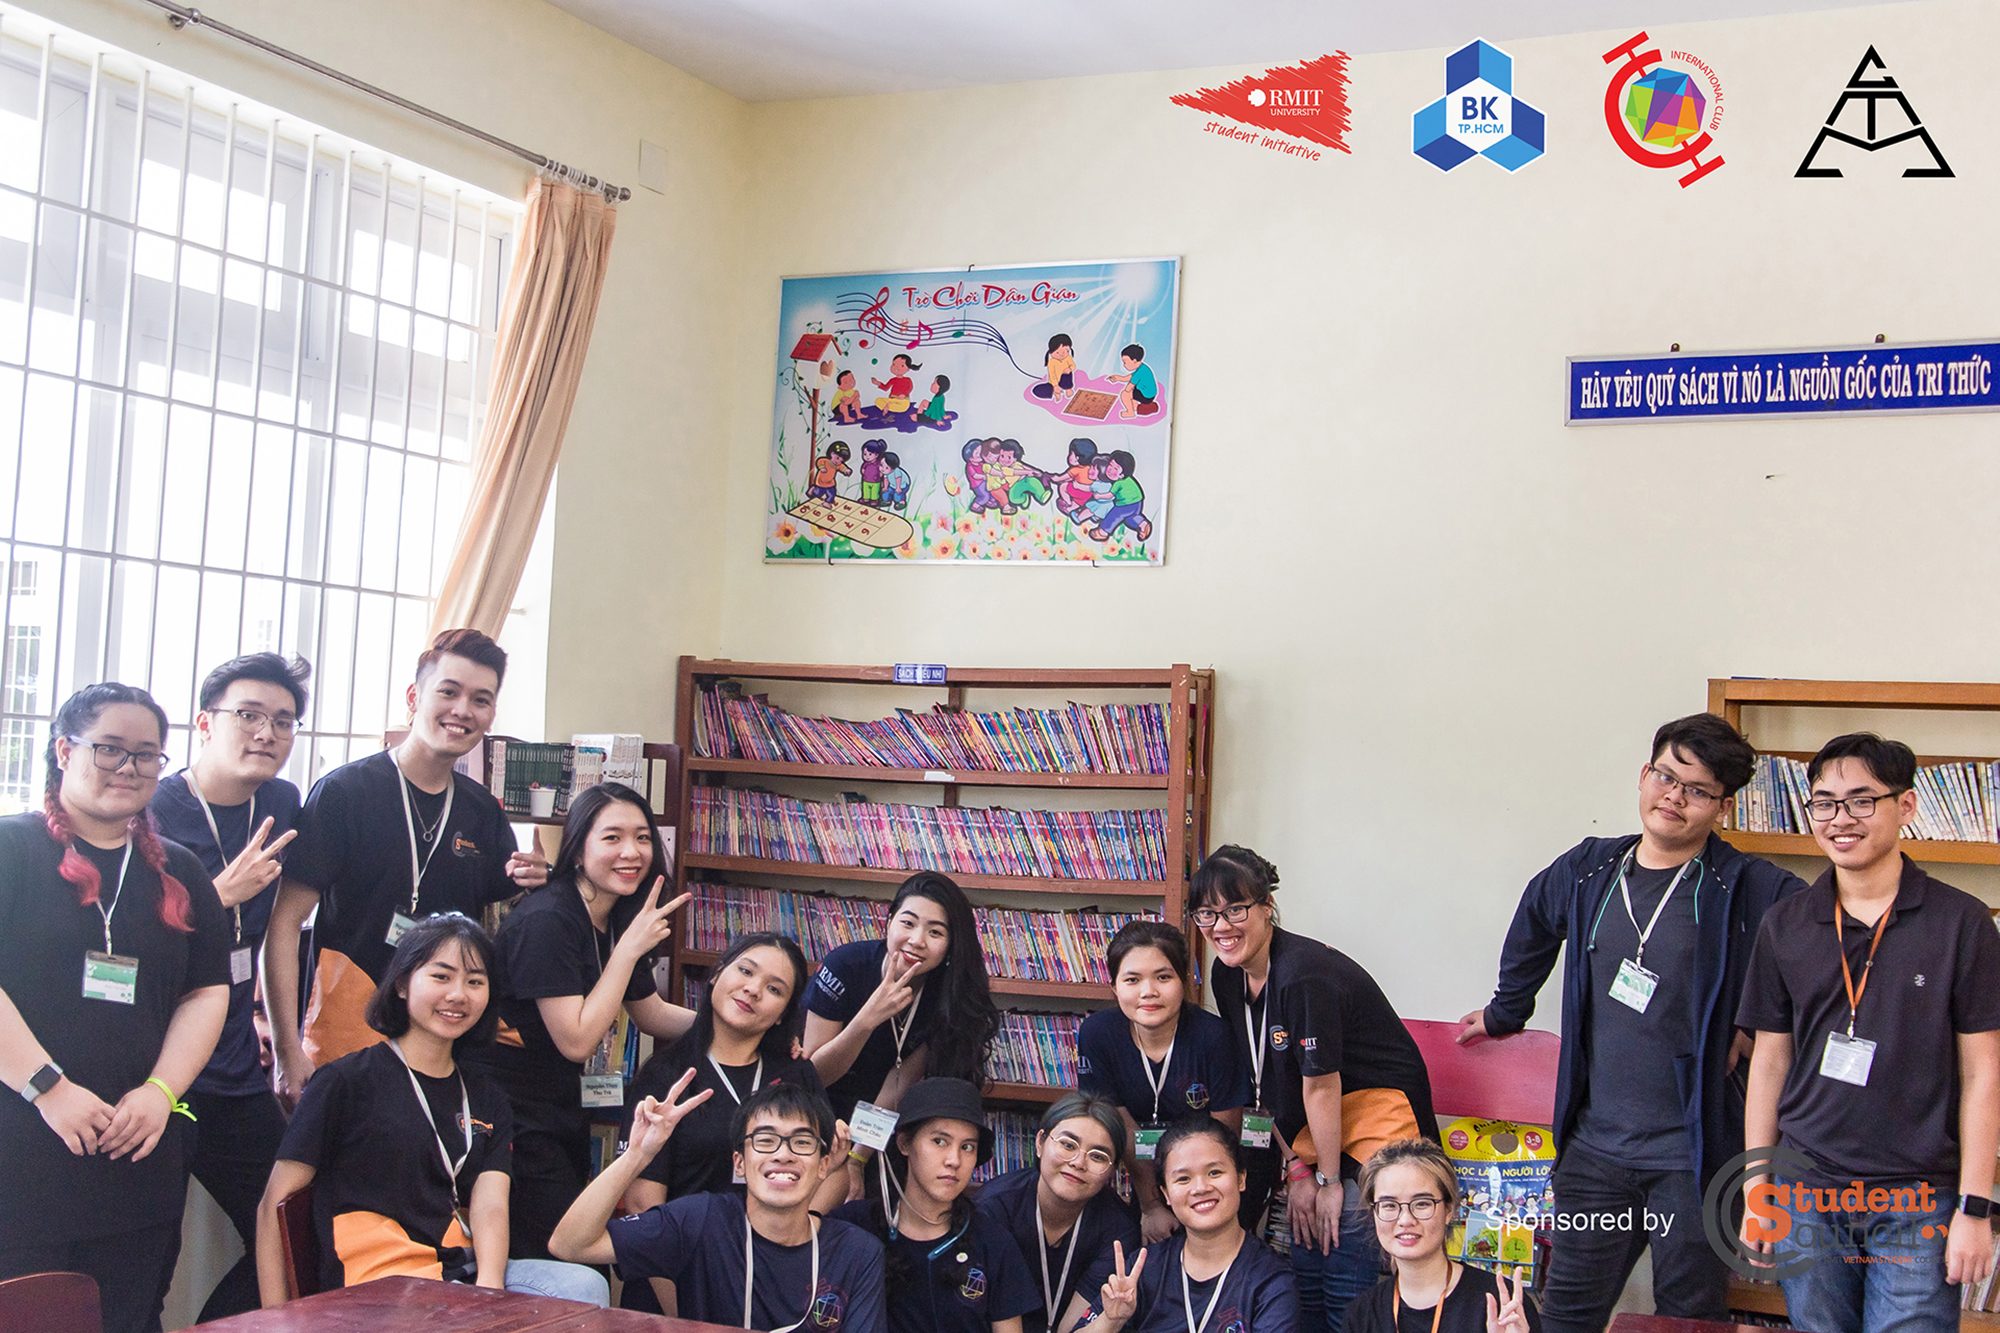 After RMIT student volunteers finished building the bookshelves, they filled them with books and comics for pupils at Tran Van Quan primary school.  